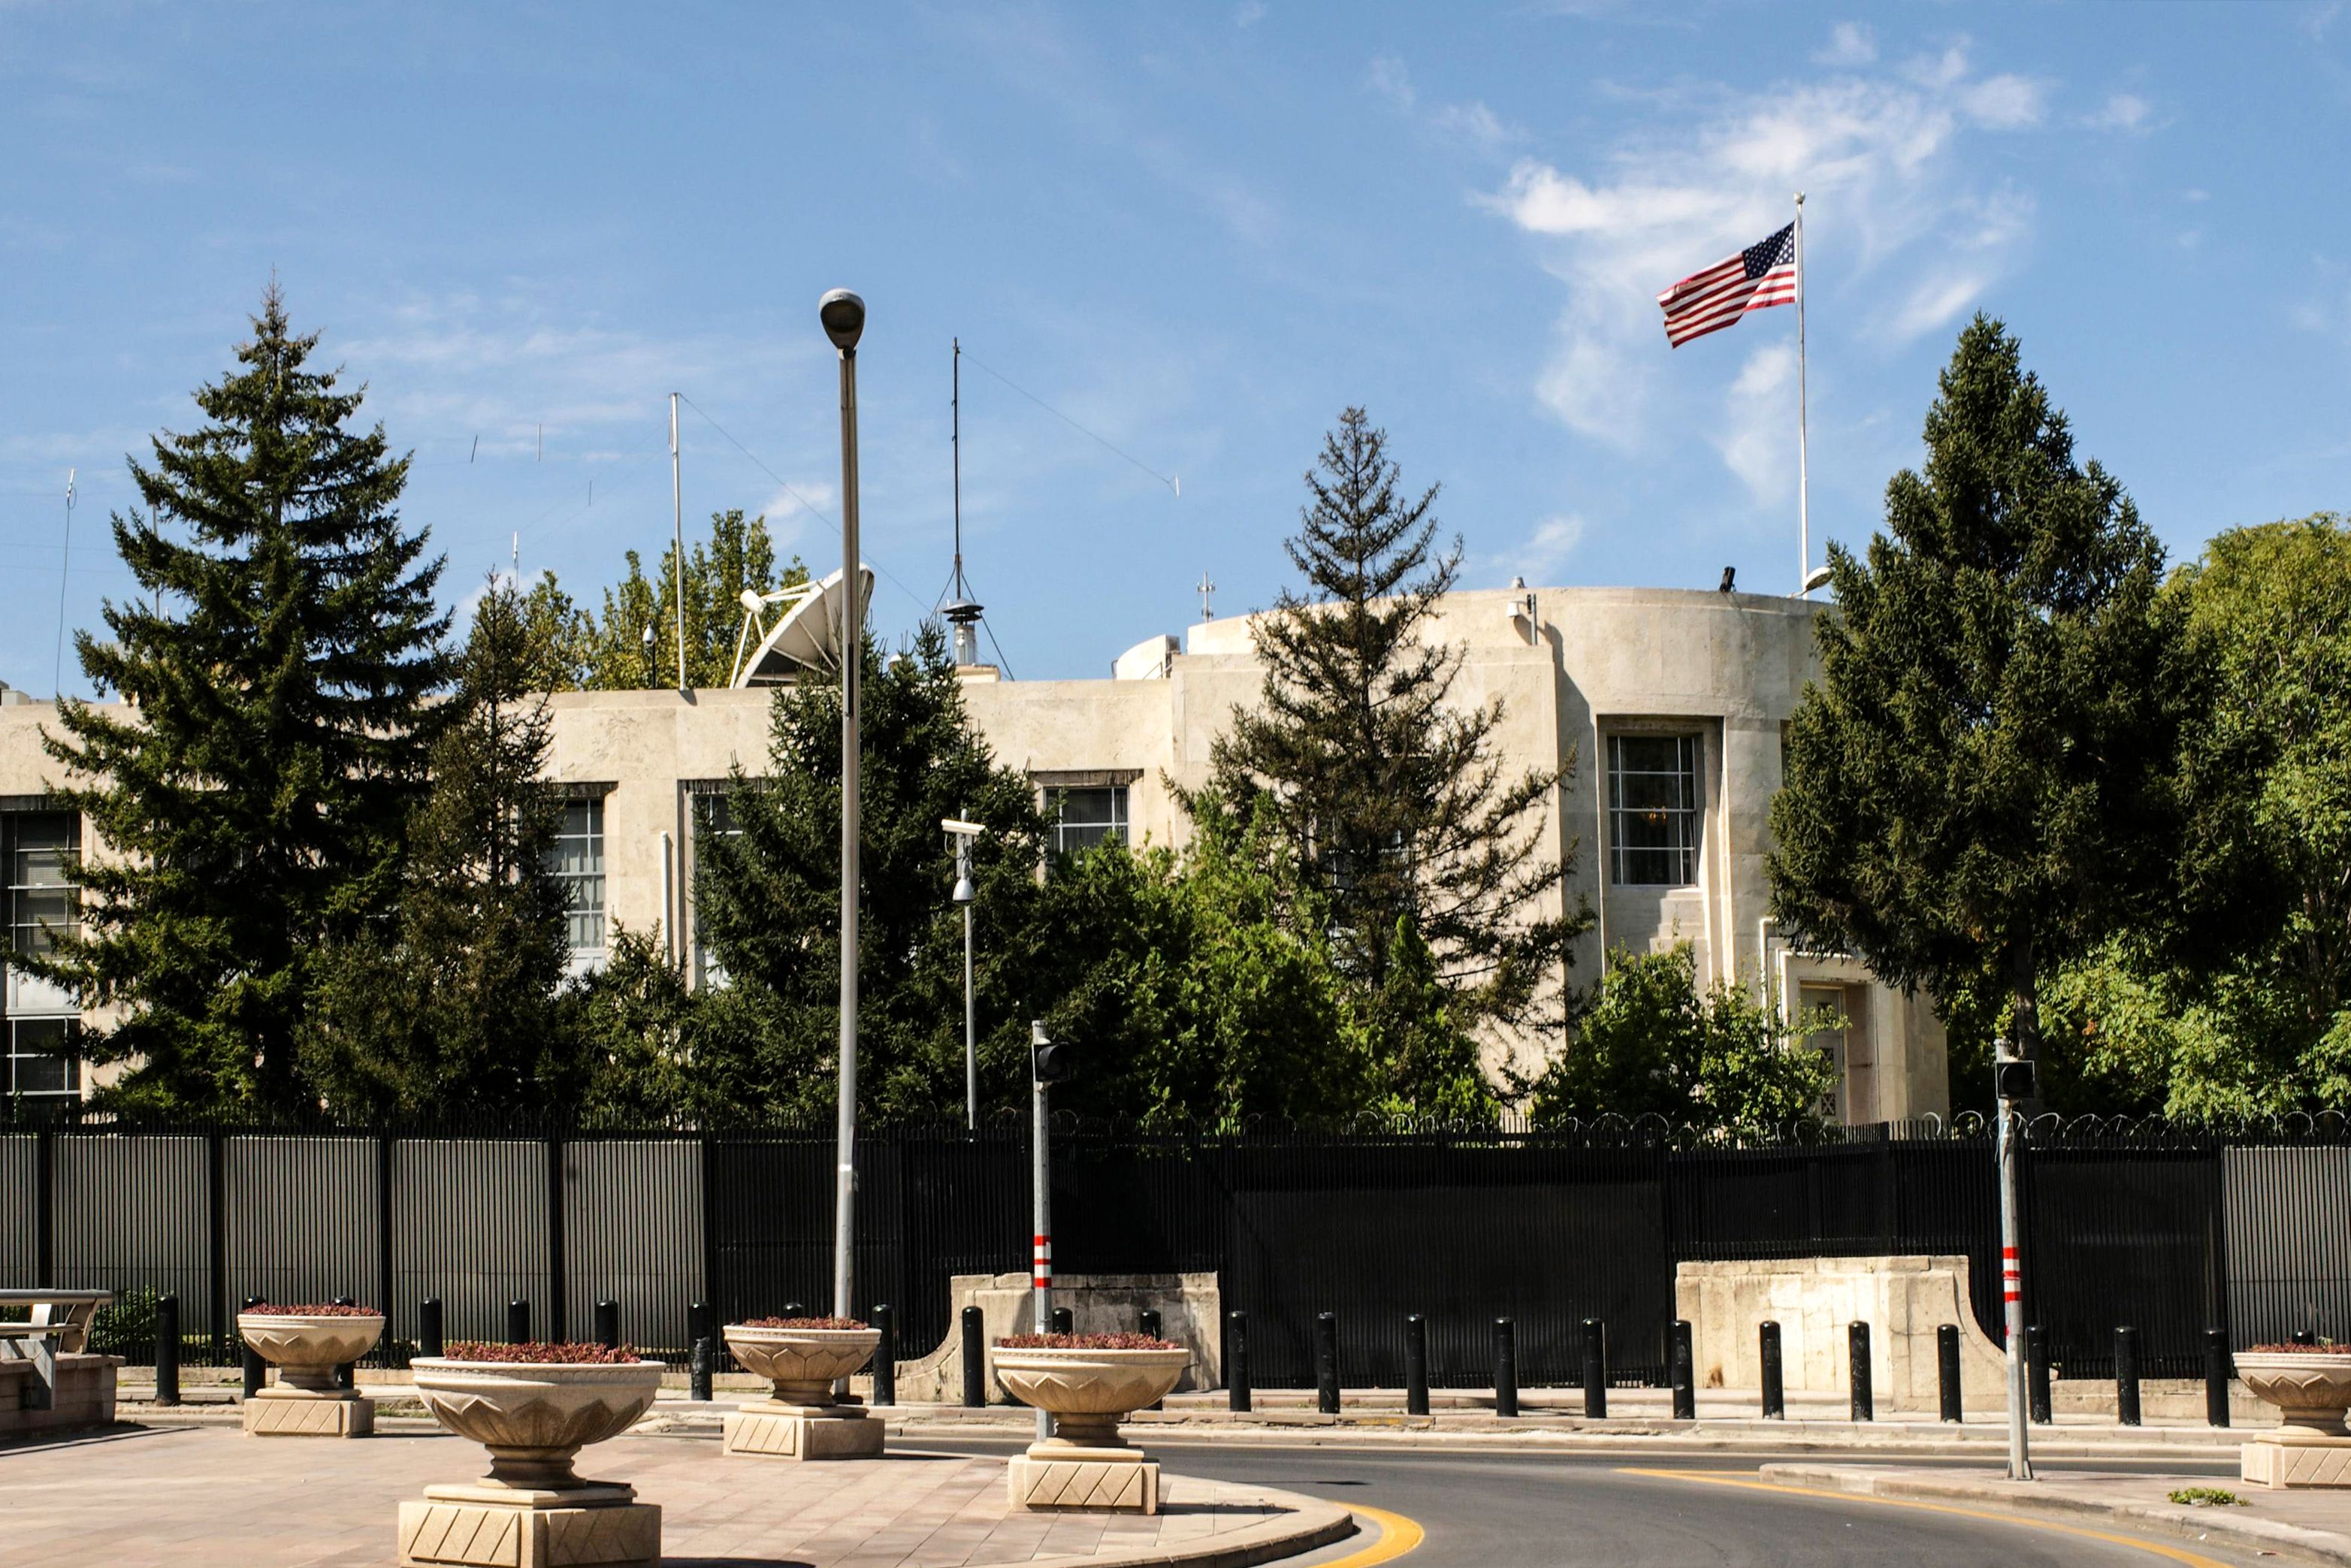 Gunshots were fired early on August 20, 2018, at the US embassy in Ankara but caused no casualties, Turkish and American officials said, amid escalating tensions between the two NATO allies.